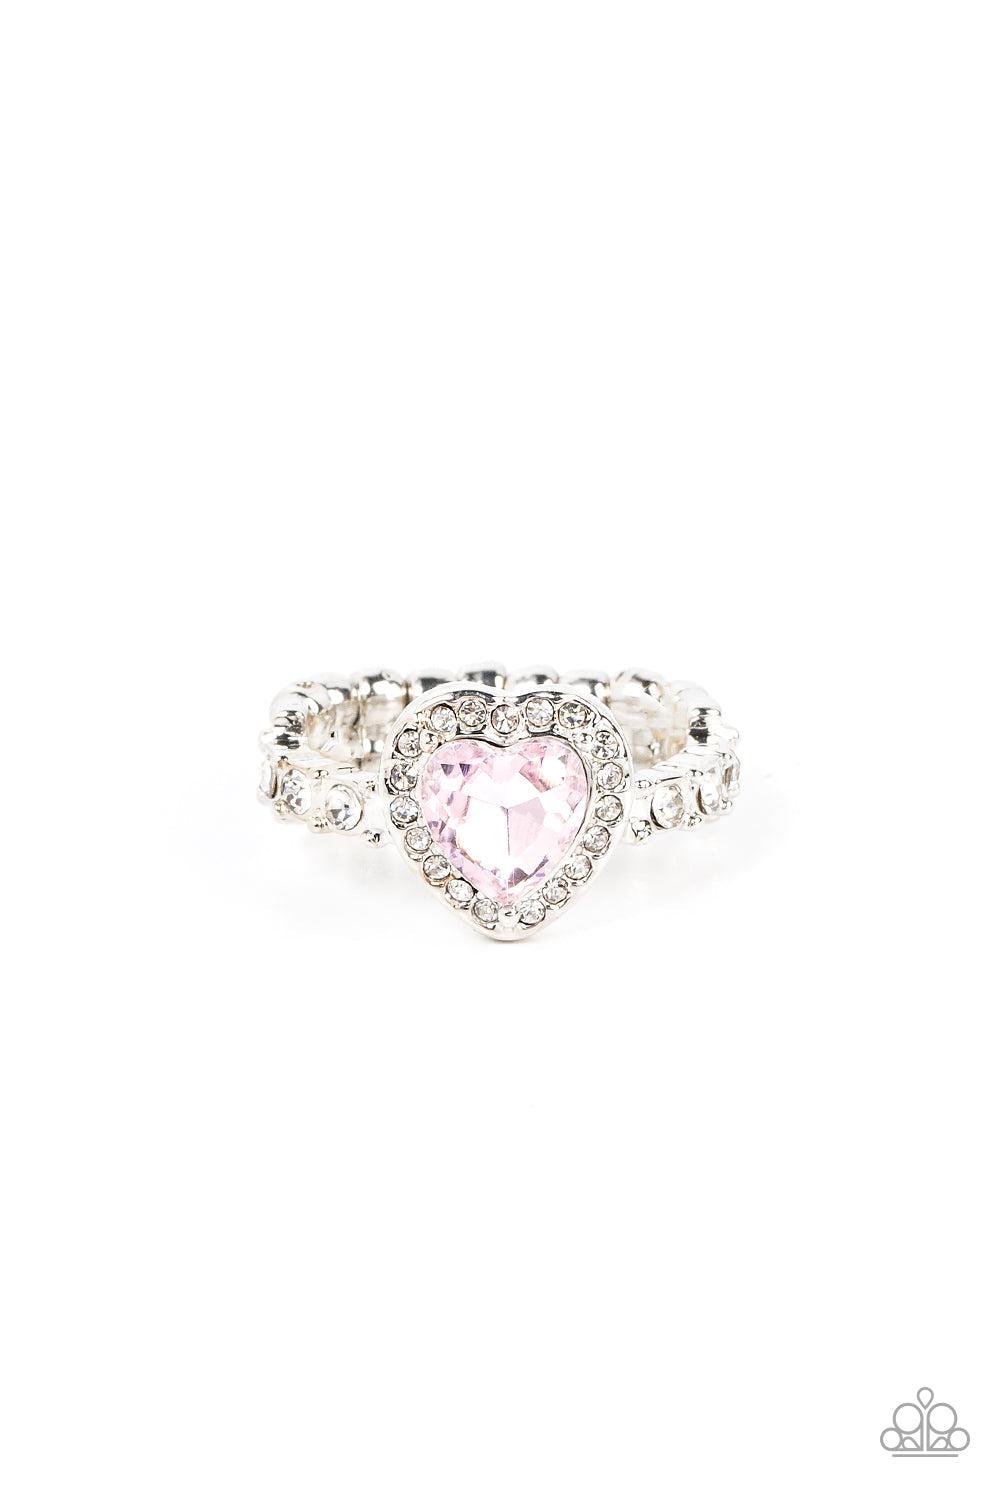 Romantic Reputation Pink Heart Ring - Paparazzi Accessories- lightbox - CarasShop.com - $5 Jewelry by Cara Jewels